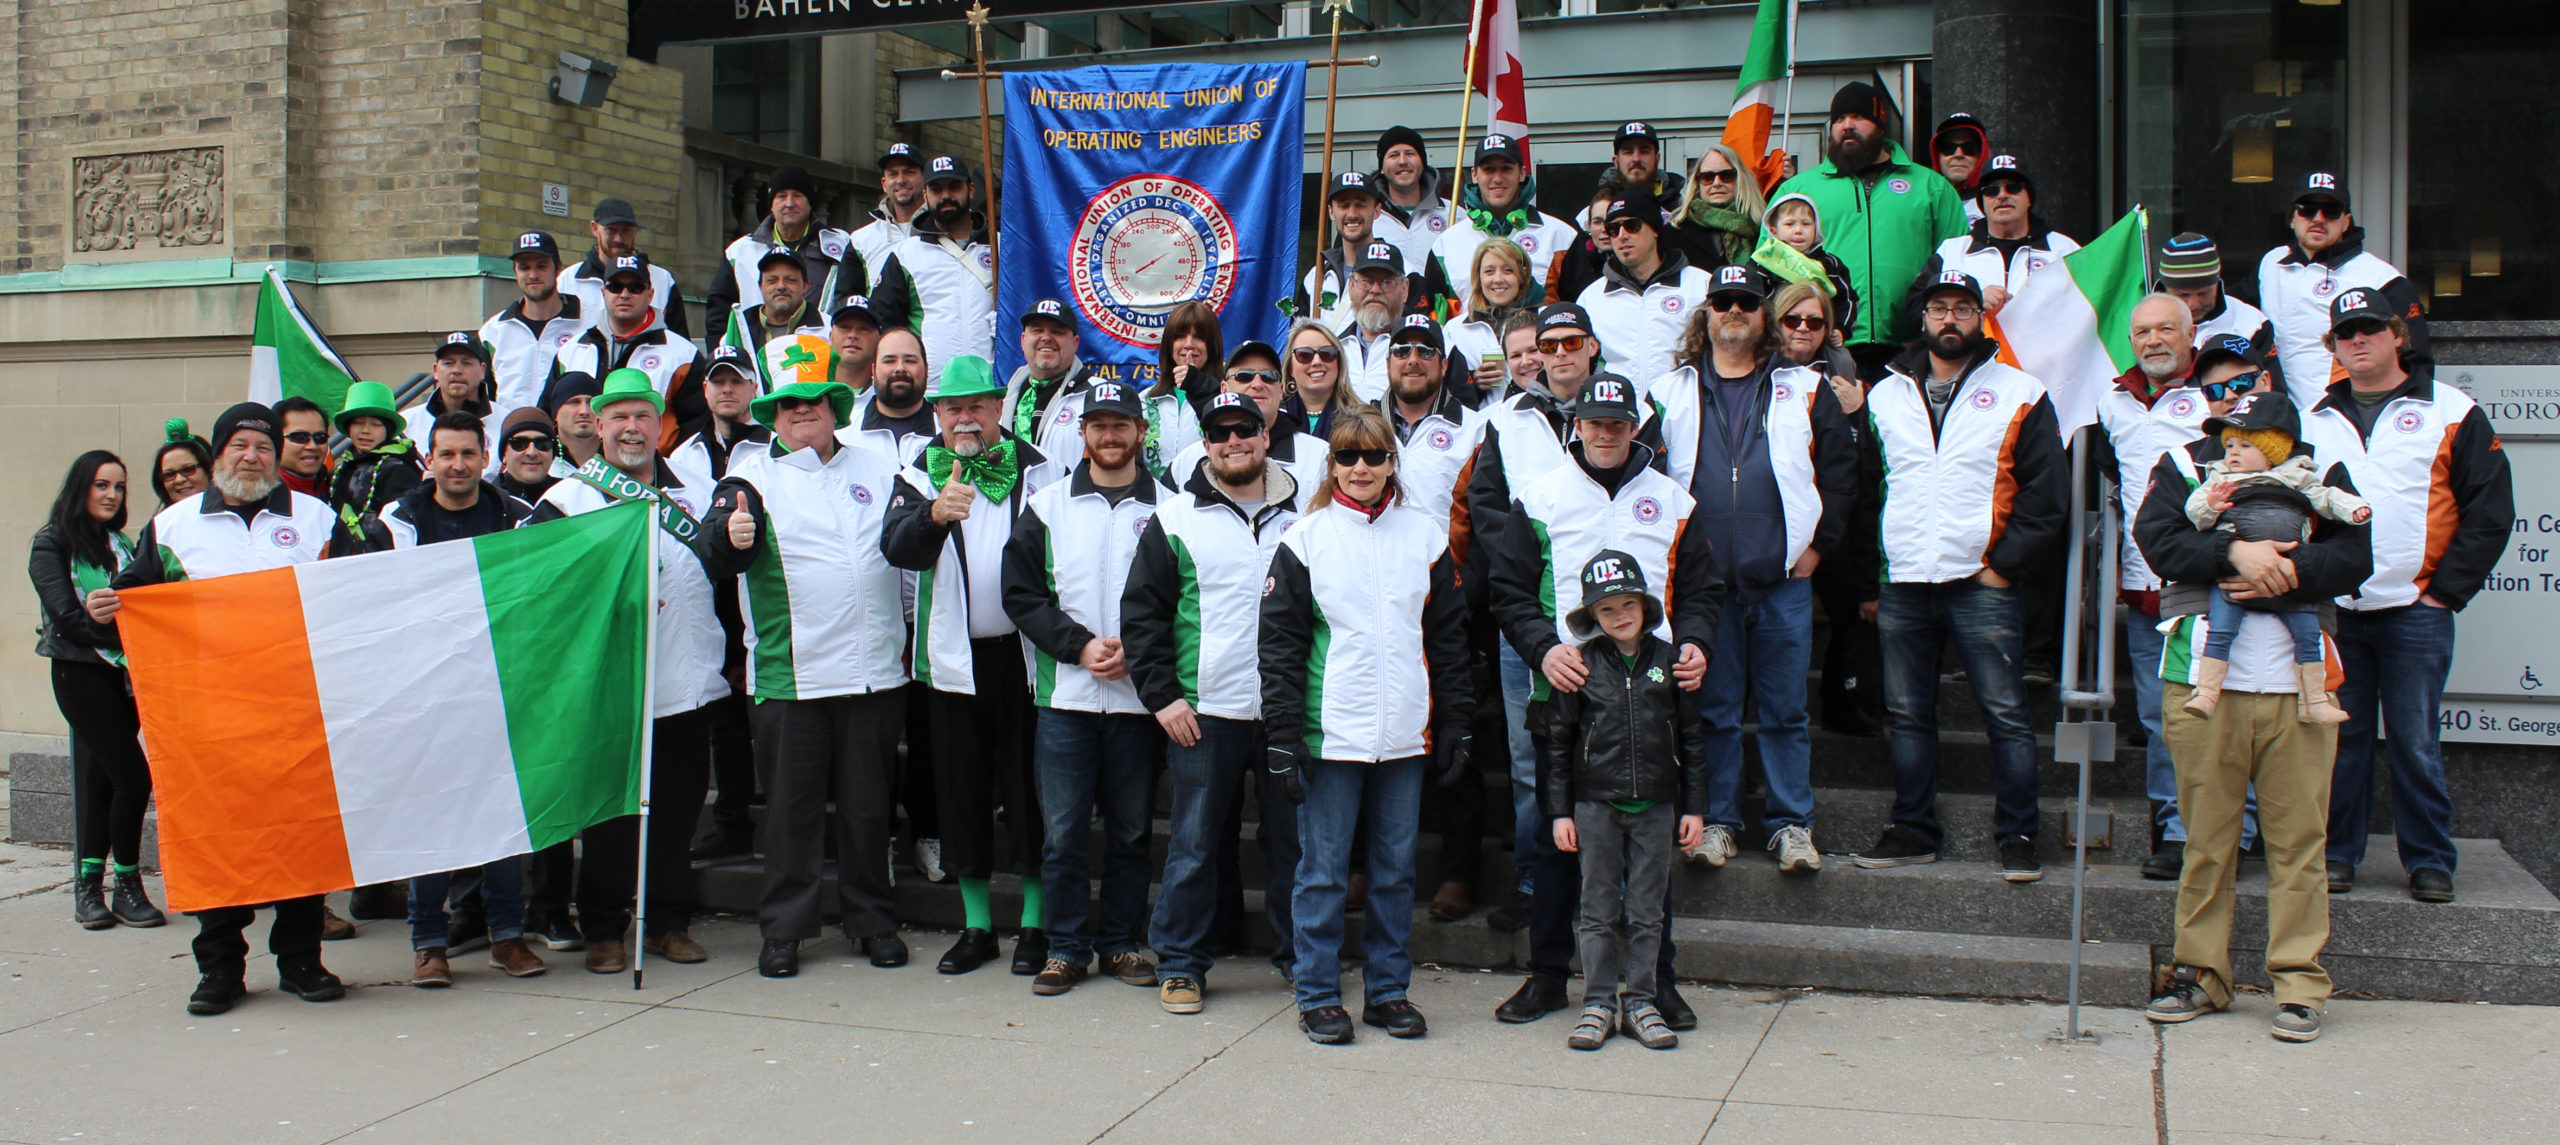 Local 793 members get in the party mood ahead of the St Patrick's Day parade in Toronto.